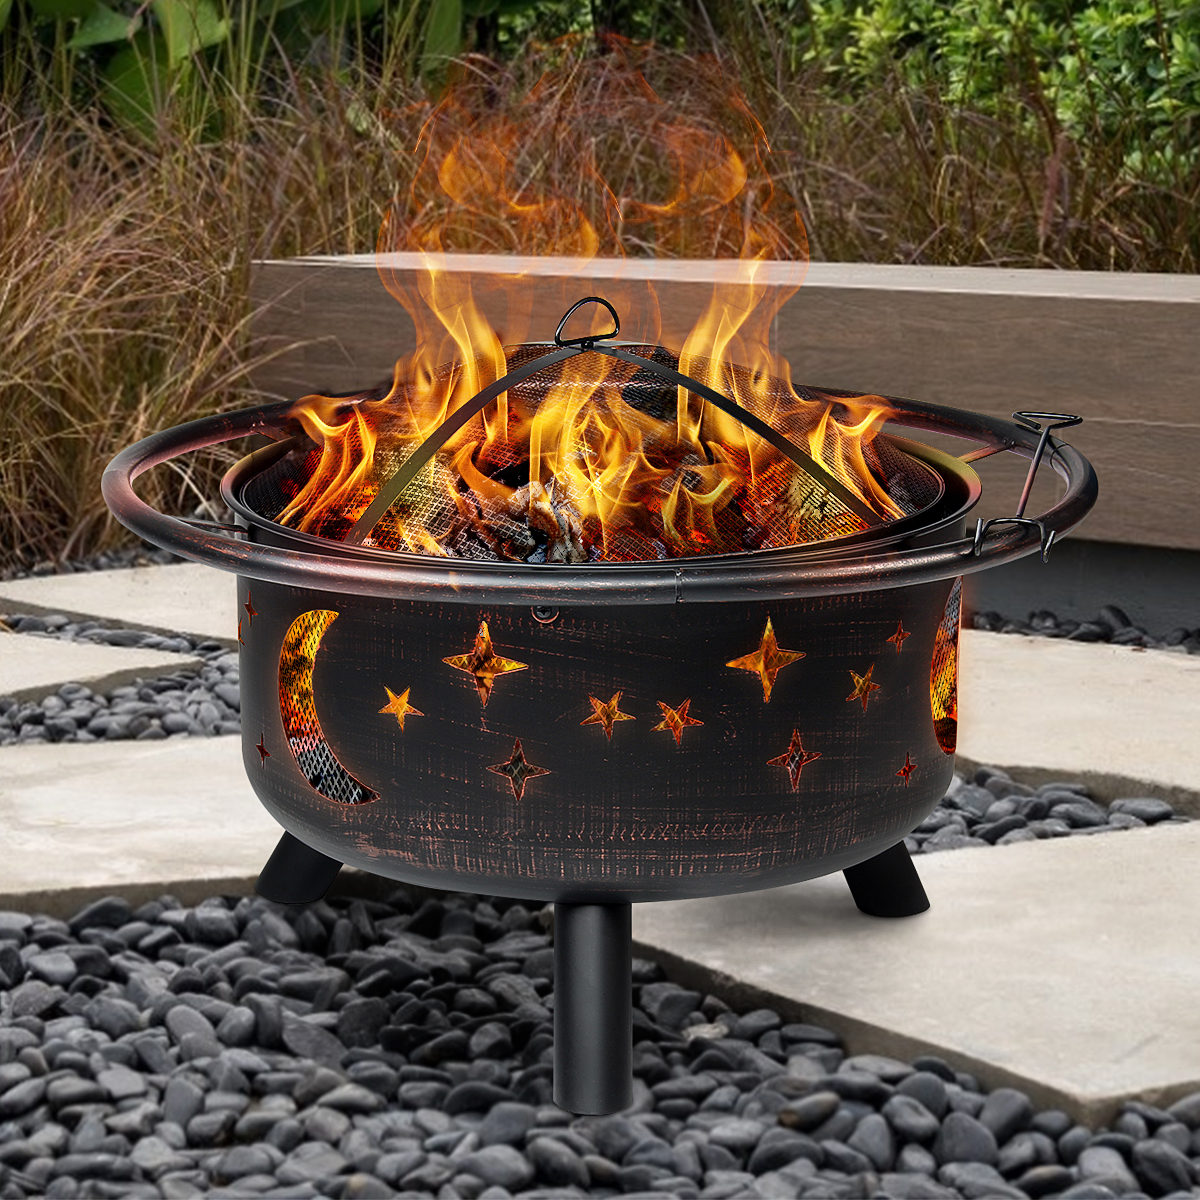 Bestgoods 30" Outdoor Fire Pit, Vintage Round Metal Firepit Bonfire Wood Burning Heater Stove Backyard Patio Garden Firepit with Spark Screen and Fireplace Poker - EASY ASSEMBLY - image 1 of 10